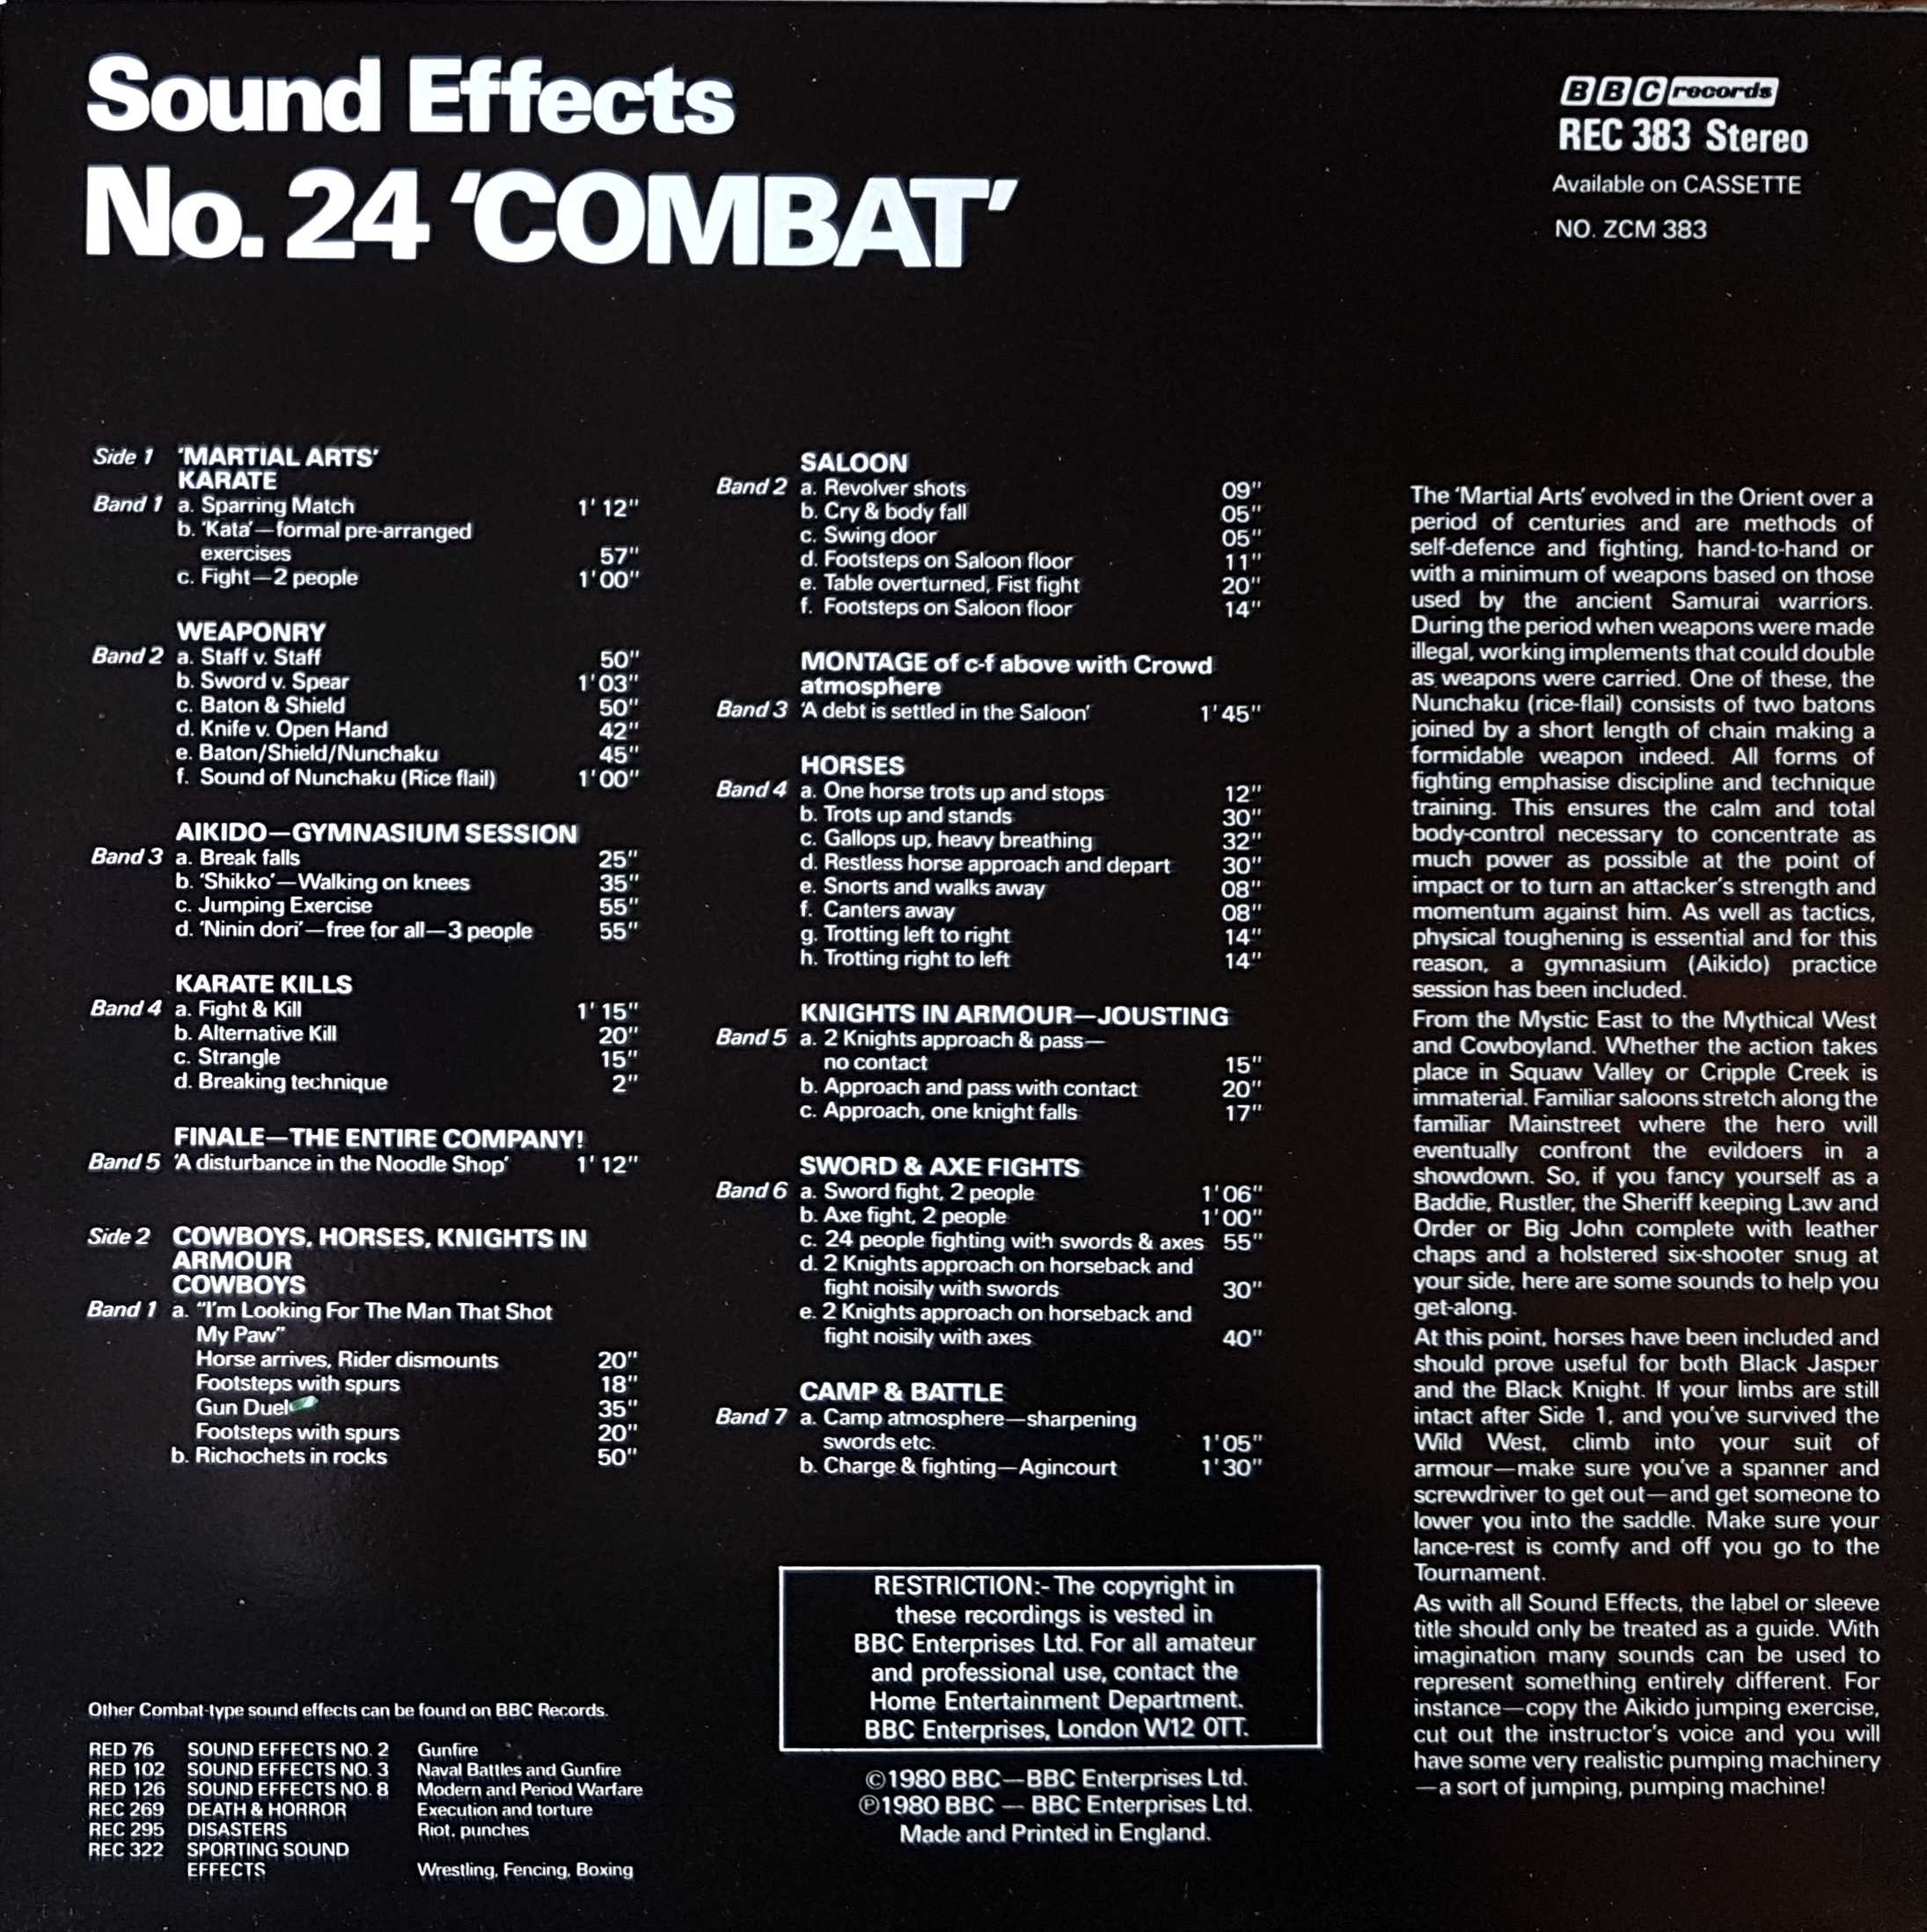 Picture of REC 383 Combat sound effects by artist Various from the BBC records and Tapes library